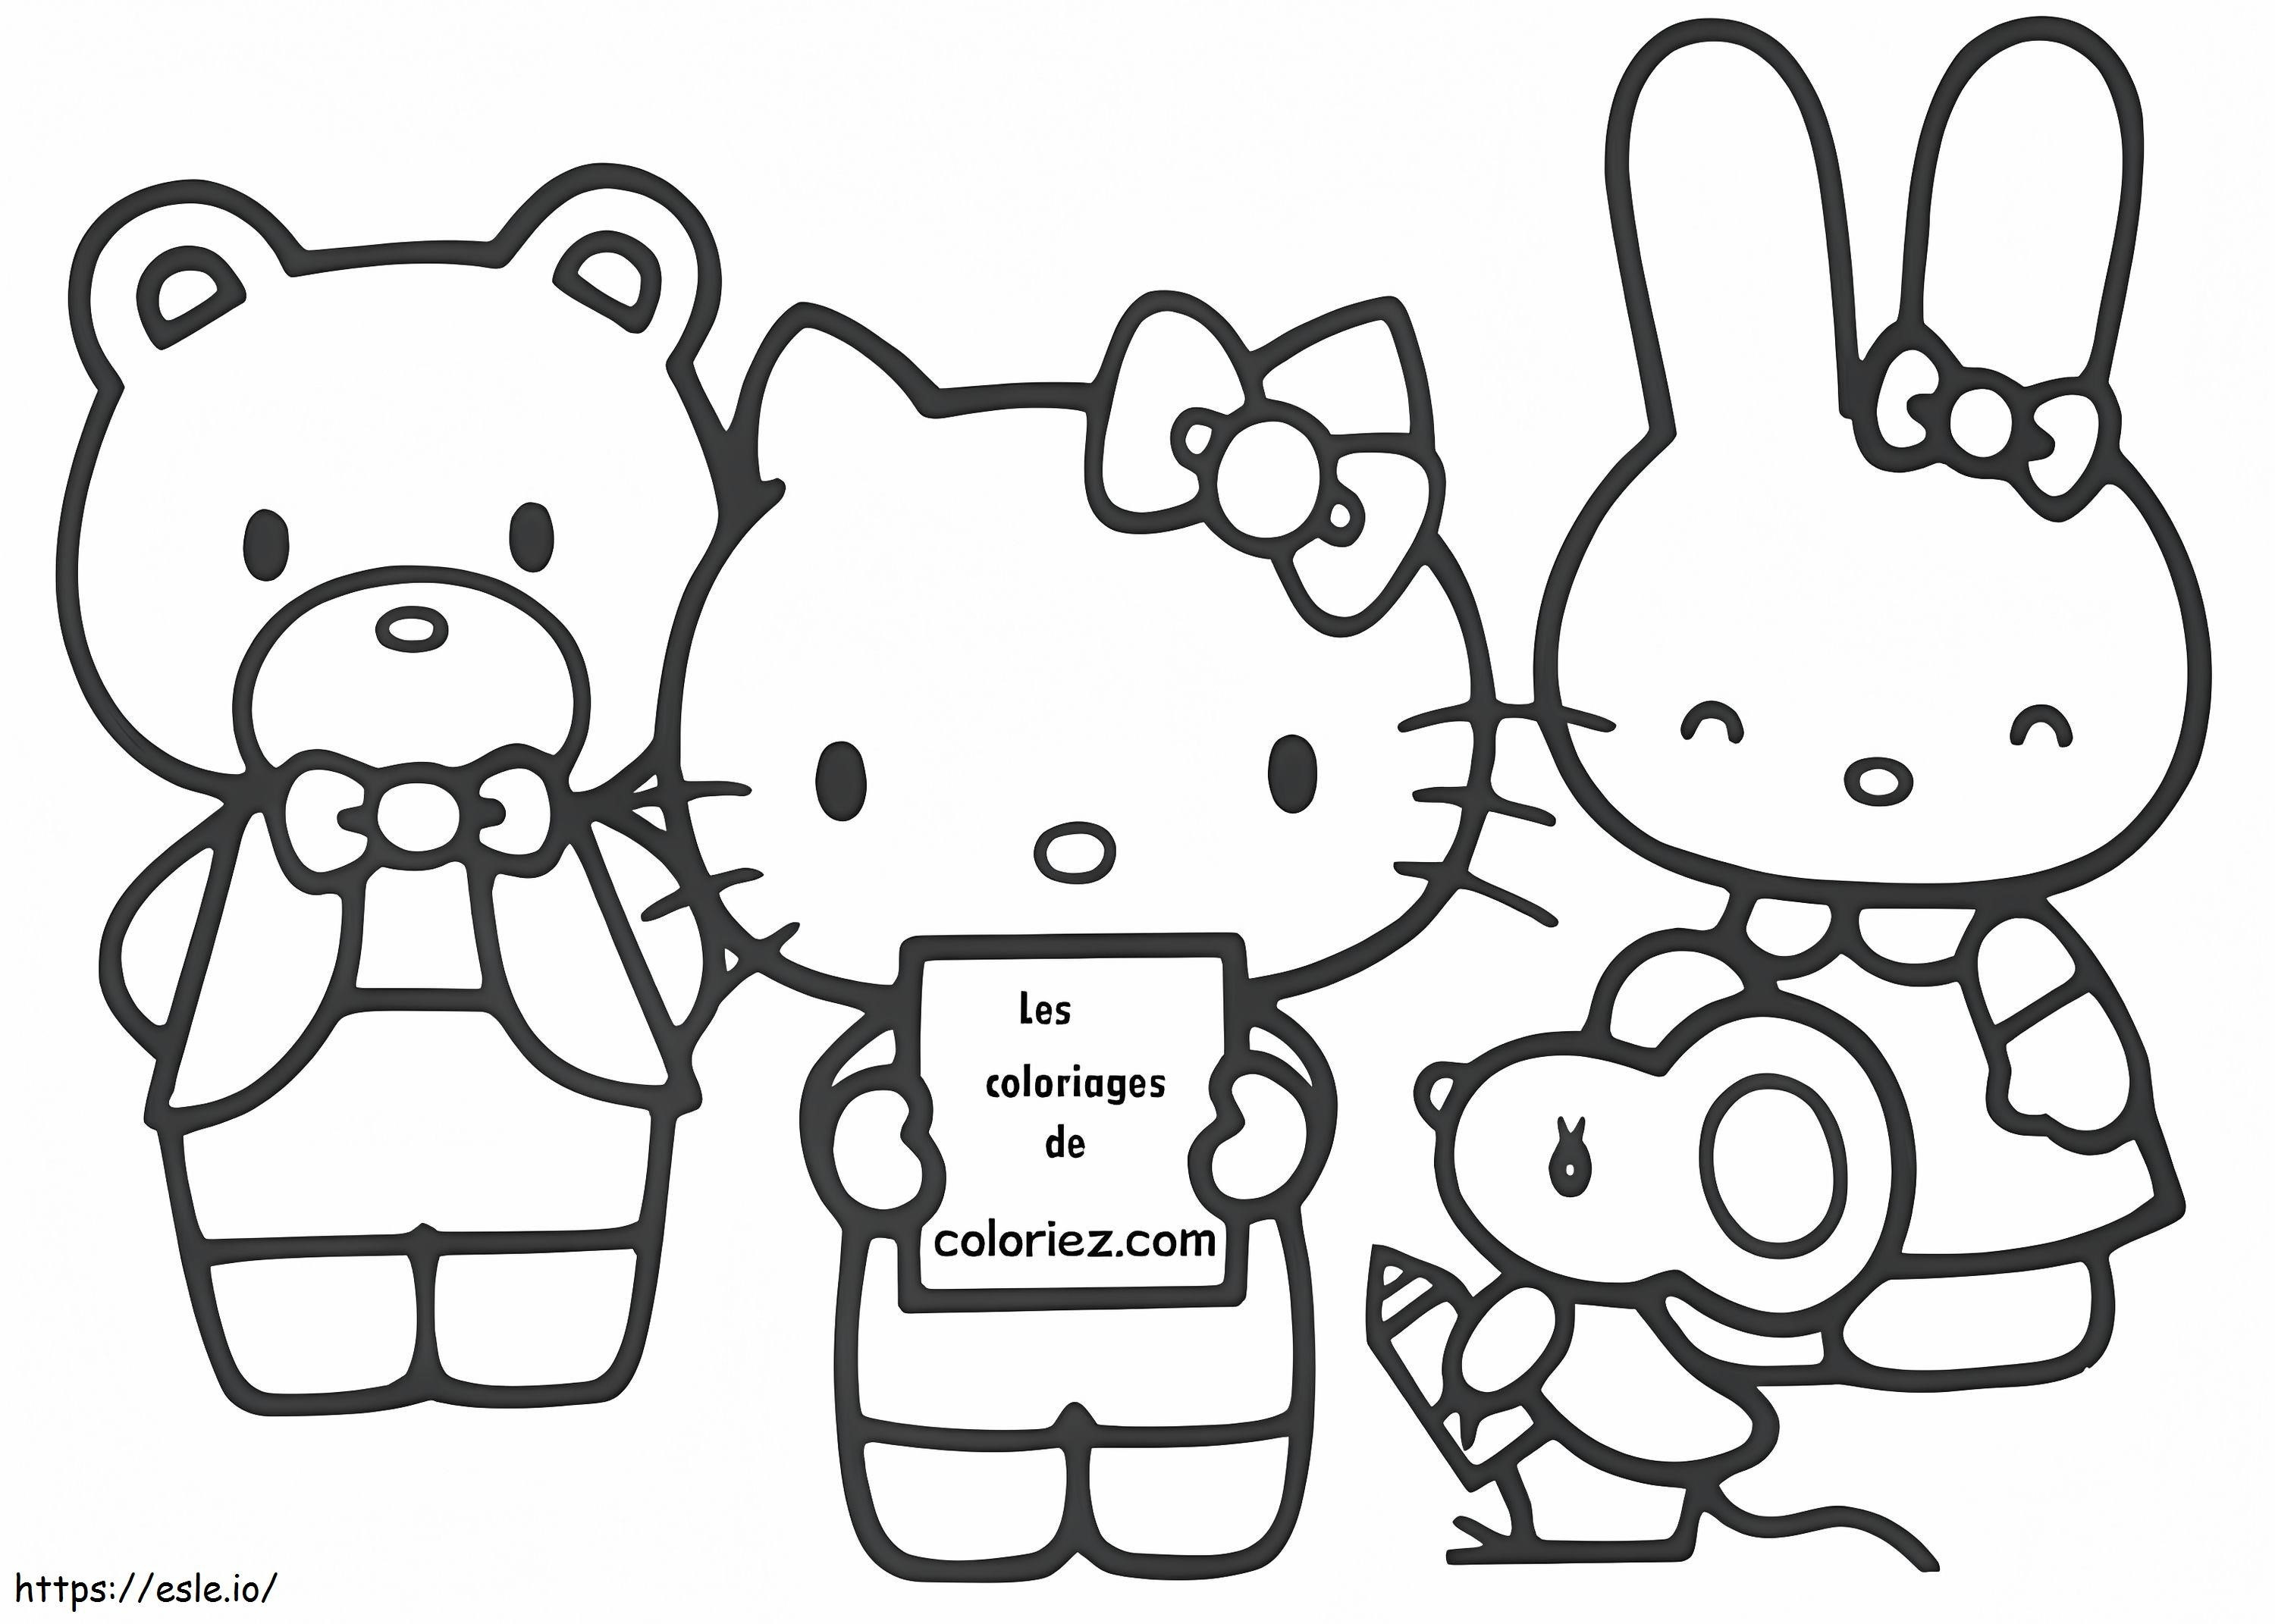 Hello Kitty Loves Coloring Pages coloring page